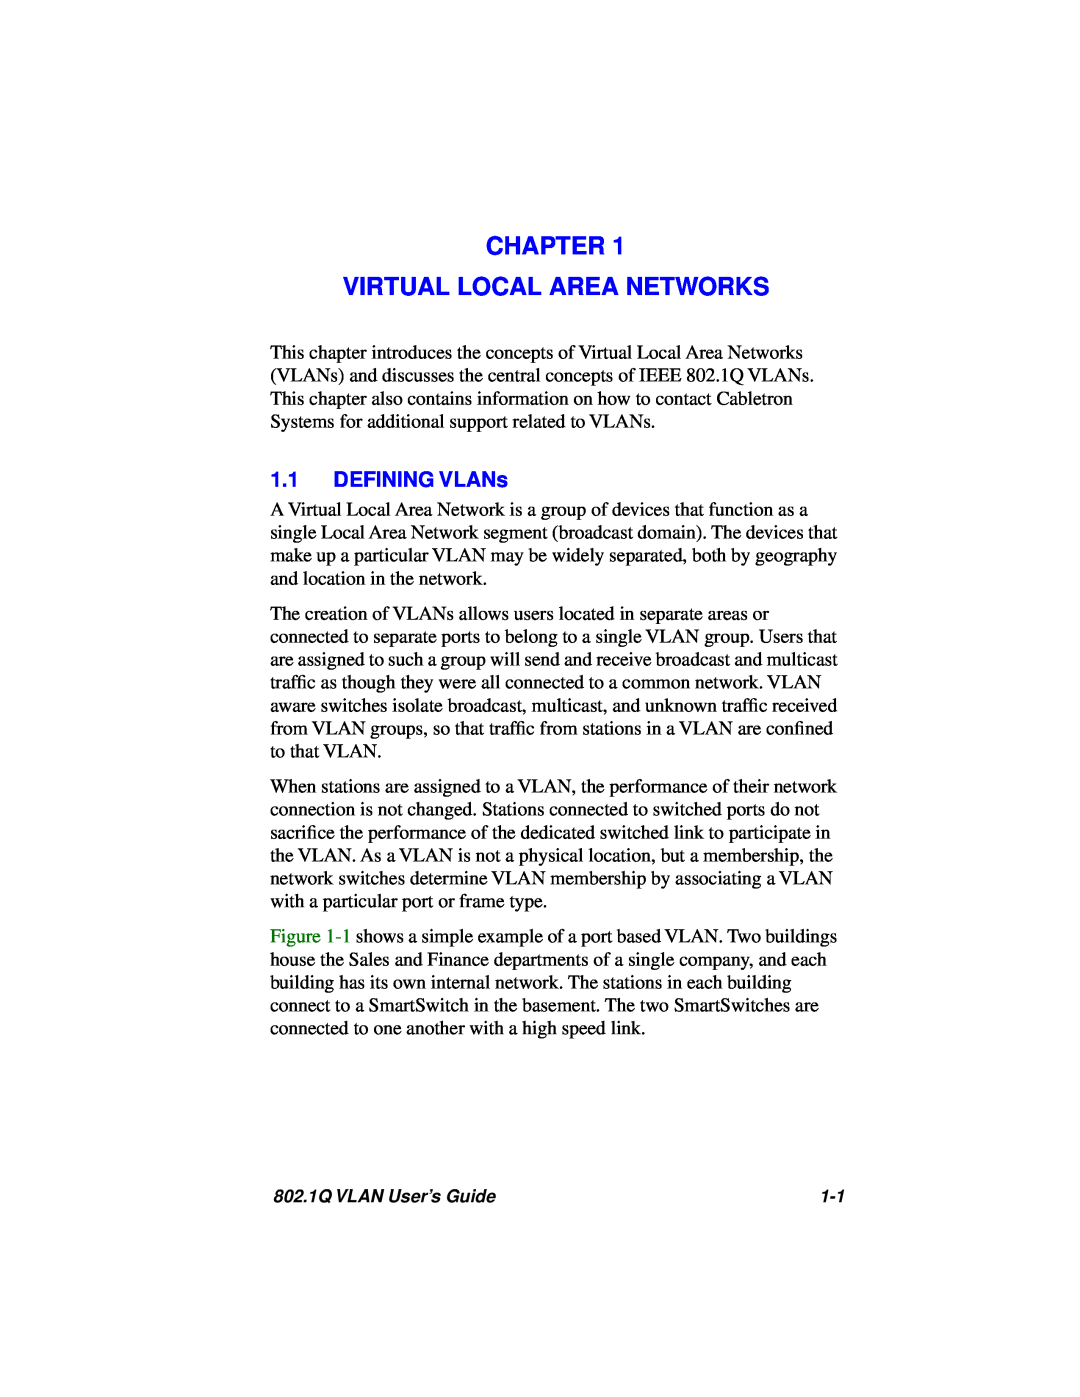 Cabletron Systems 802.1Q manual Chapter Virtual Local Area Networks, DEFINING VLANs 